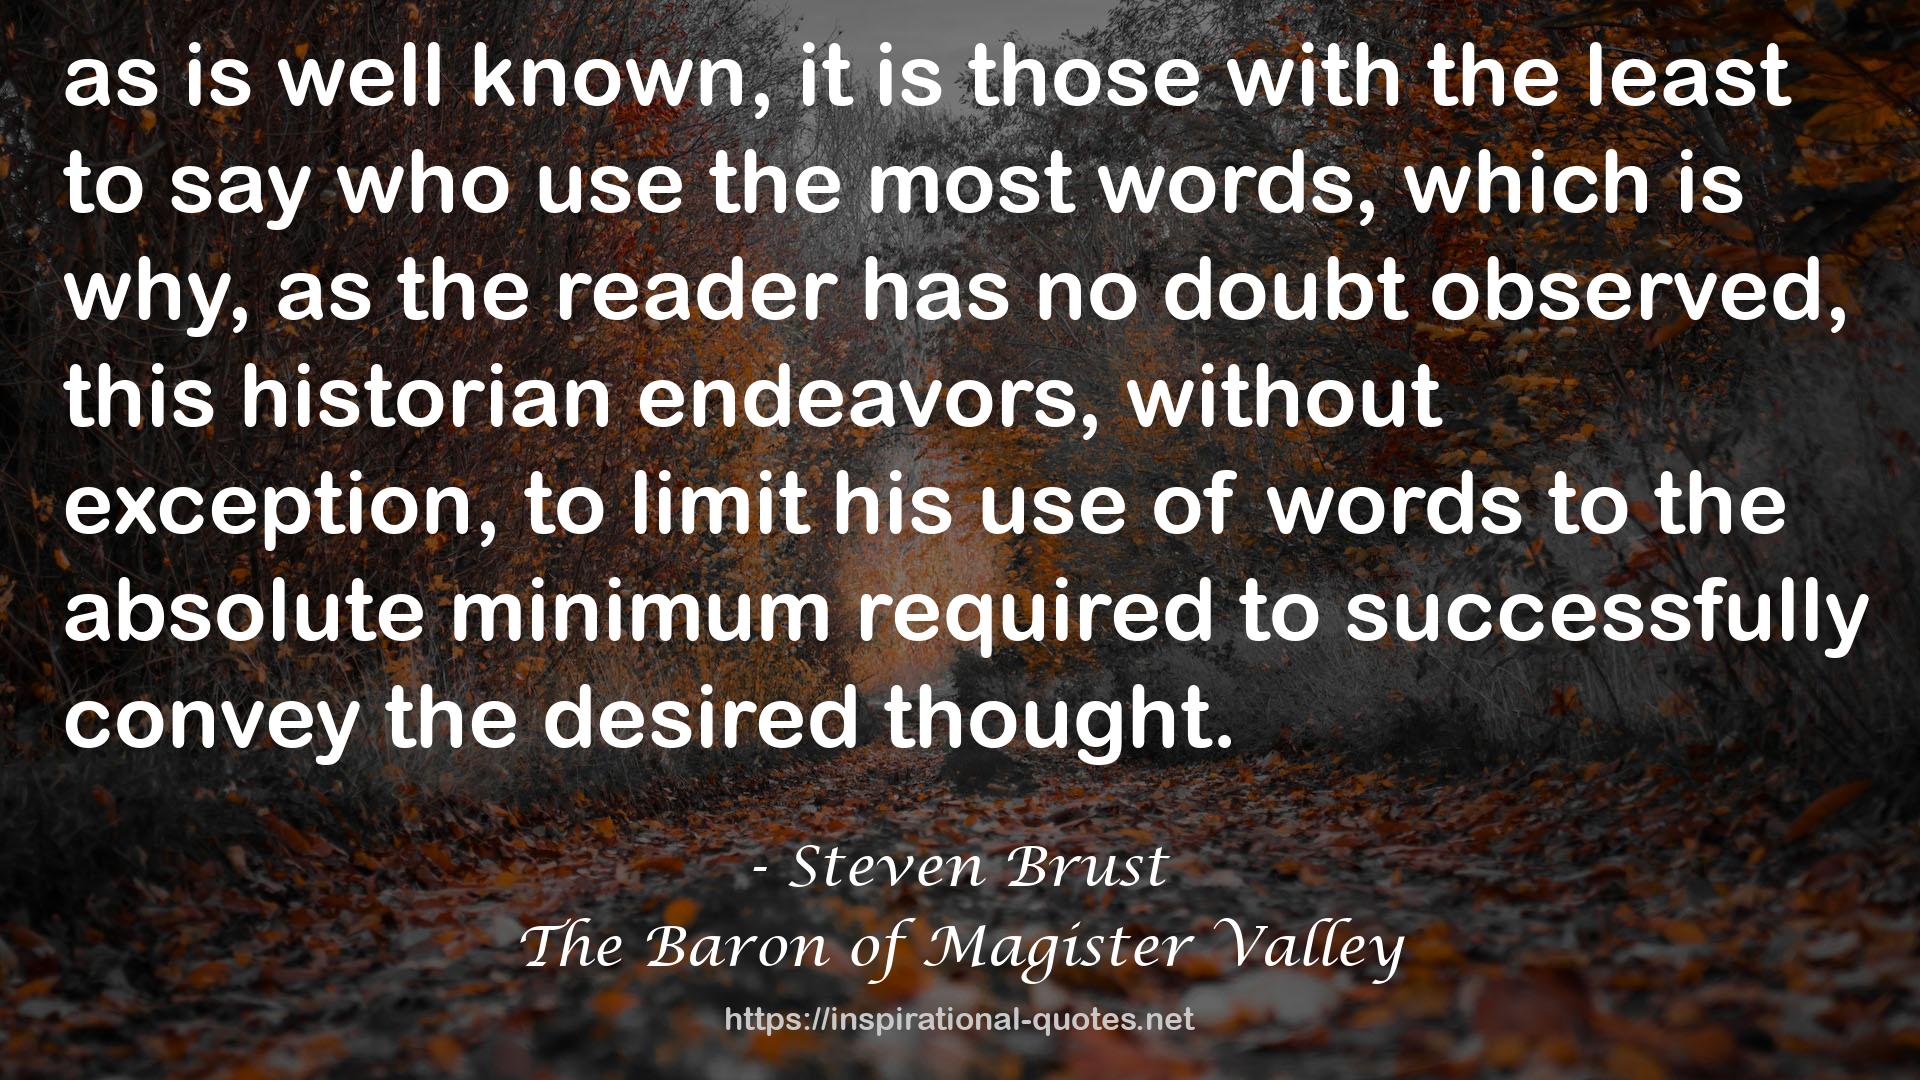 The Baron of Magister Valley QUOTES